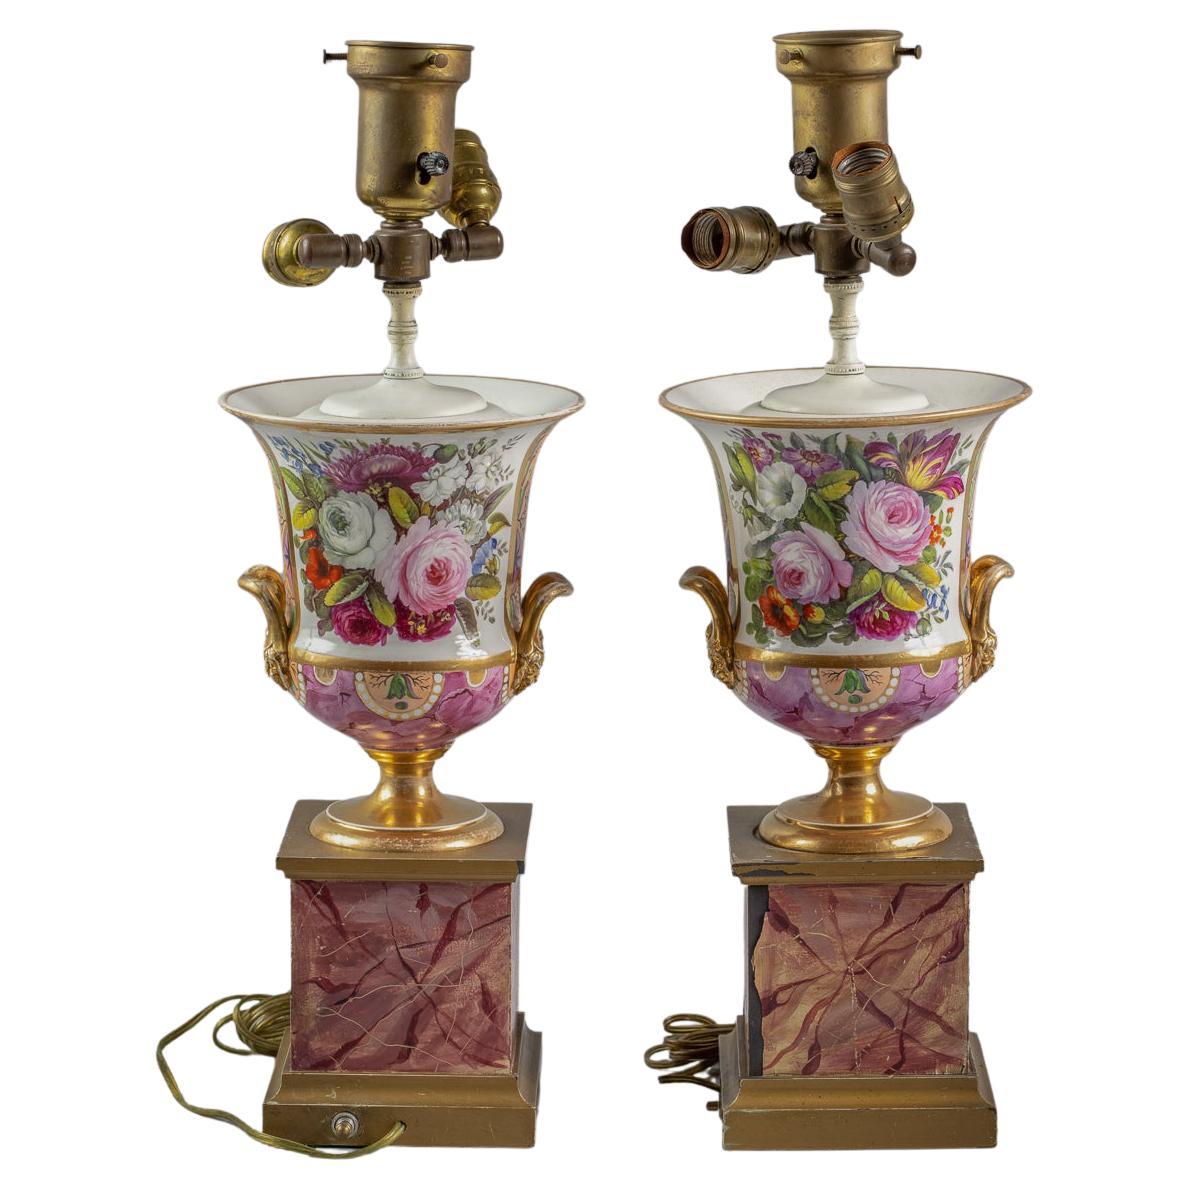 Pair of English Porcelain Two-Handled Marbleized Lamps, Coalport, circa 1840